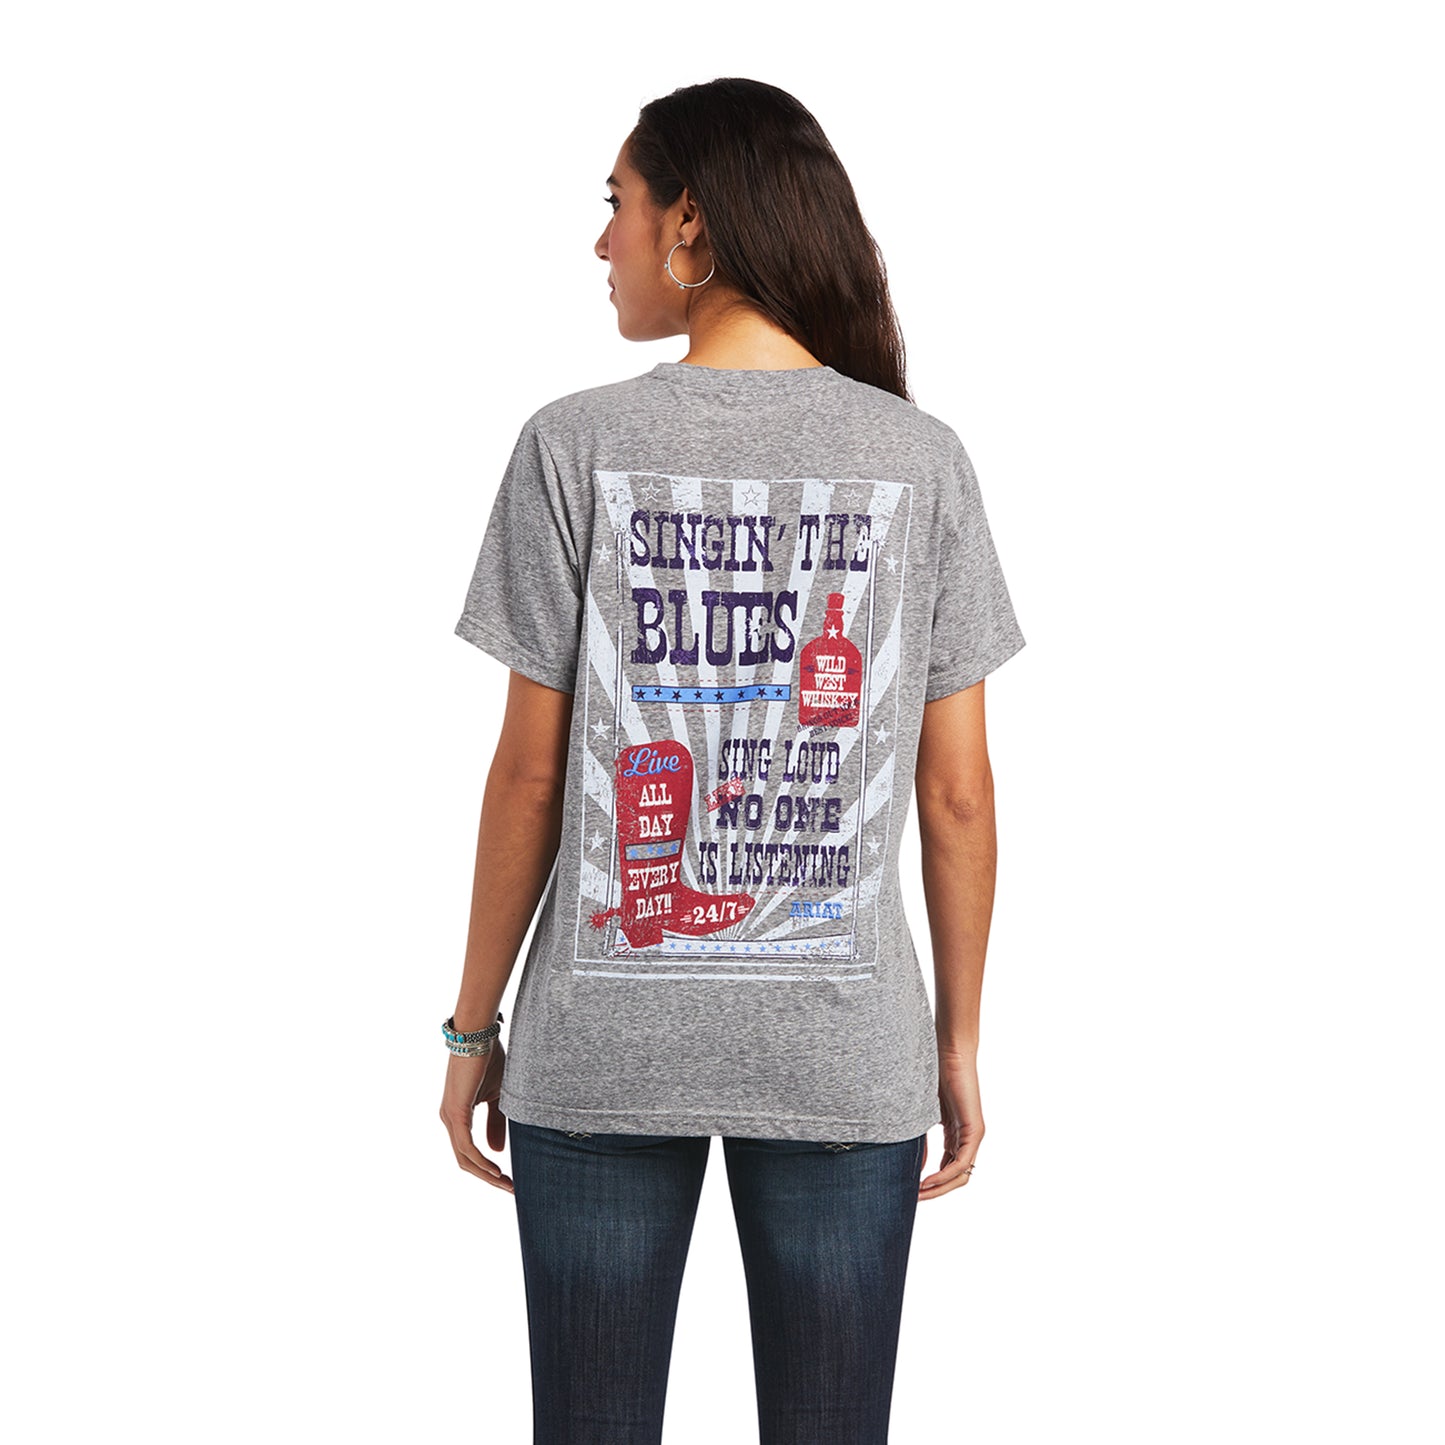 Ariat® Ladies Singing The Blues Charcoal Grey T-Shirt 10040511